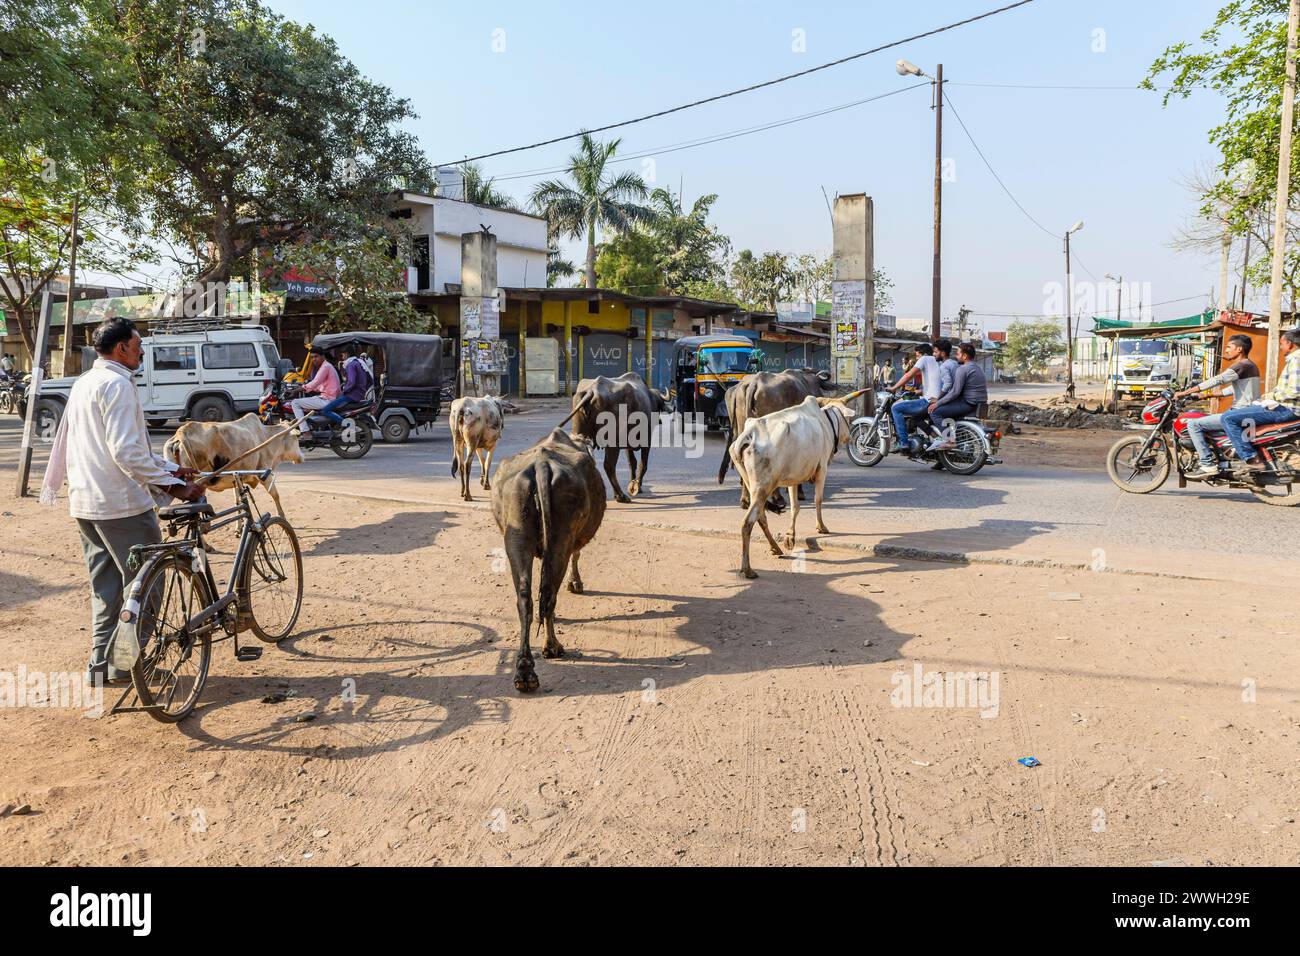 Typical street scene: cows walking in the road with local people, a bicycle and motorbikes in a town in the Umaria district of Madhya Pradesh, India Stock Photo